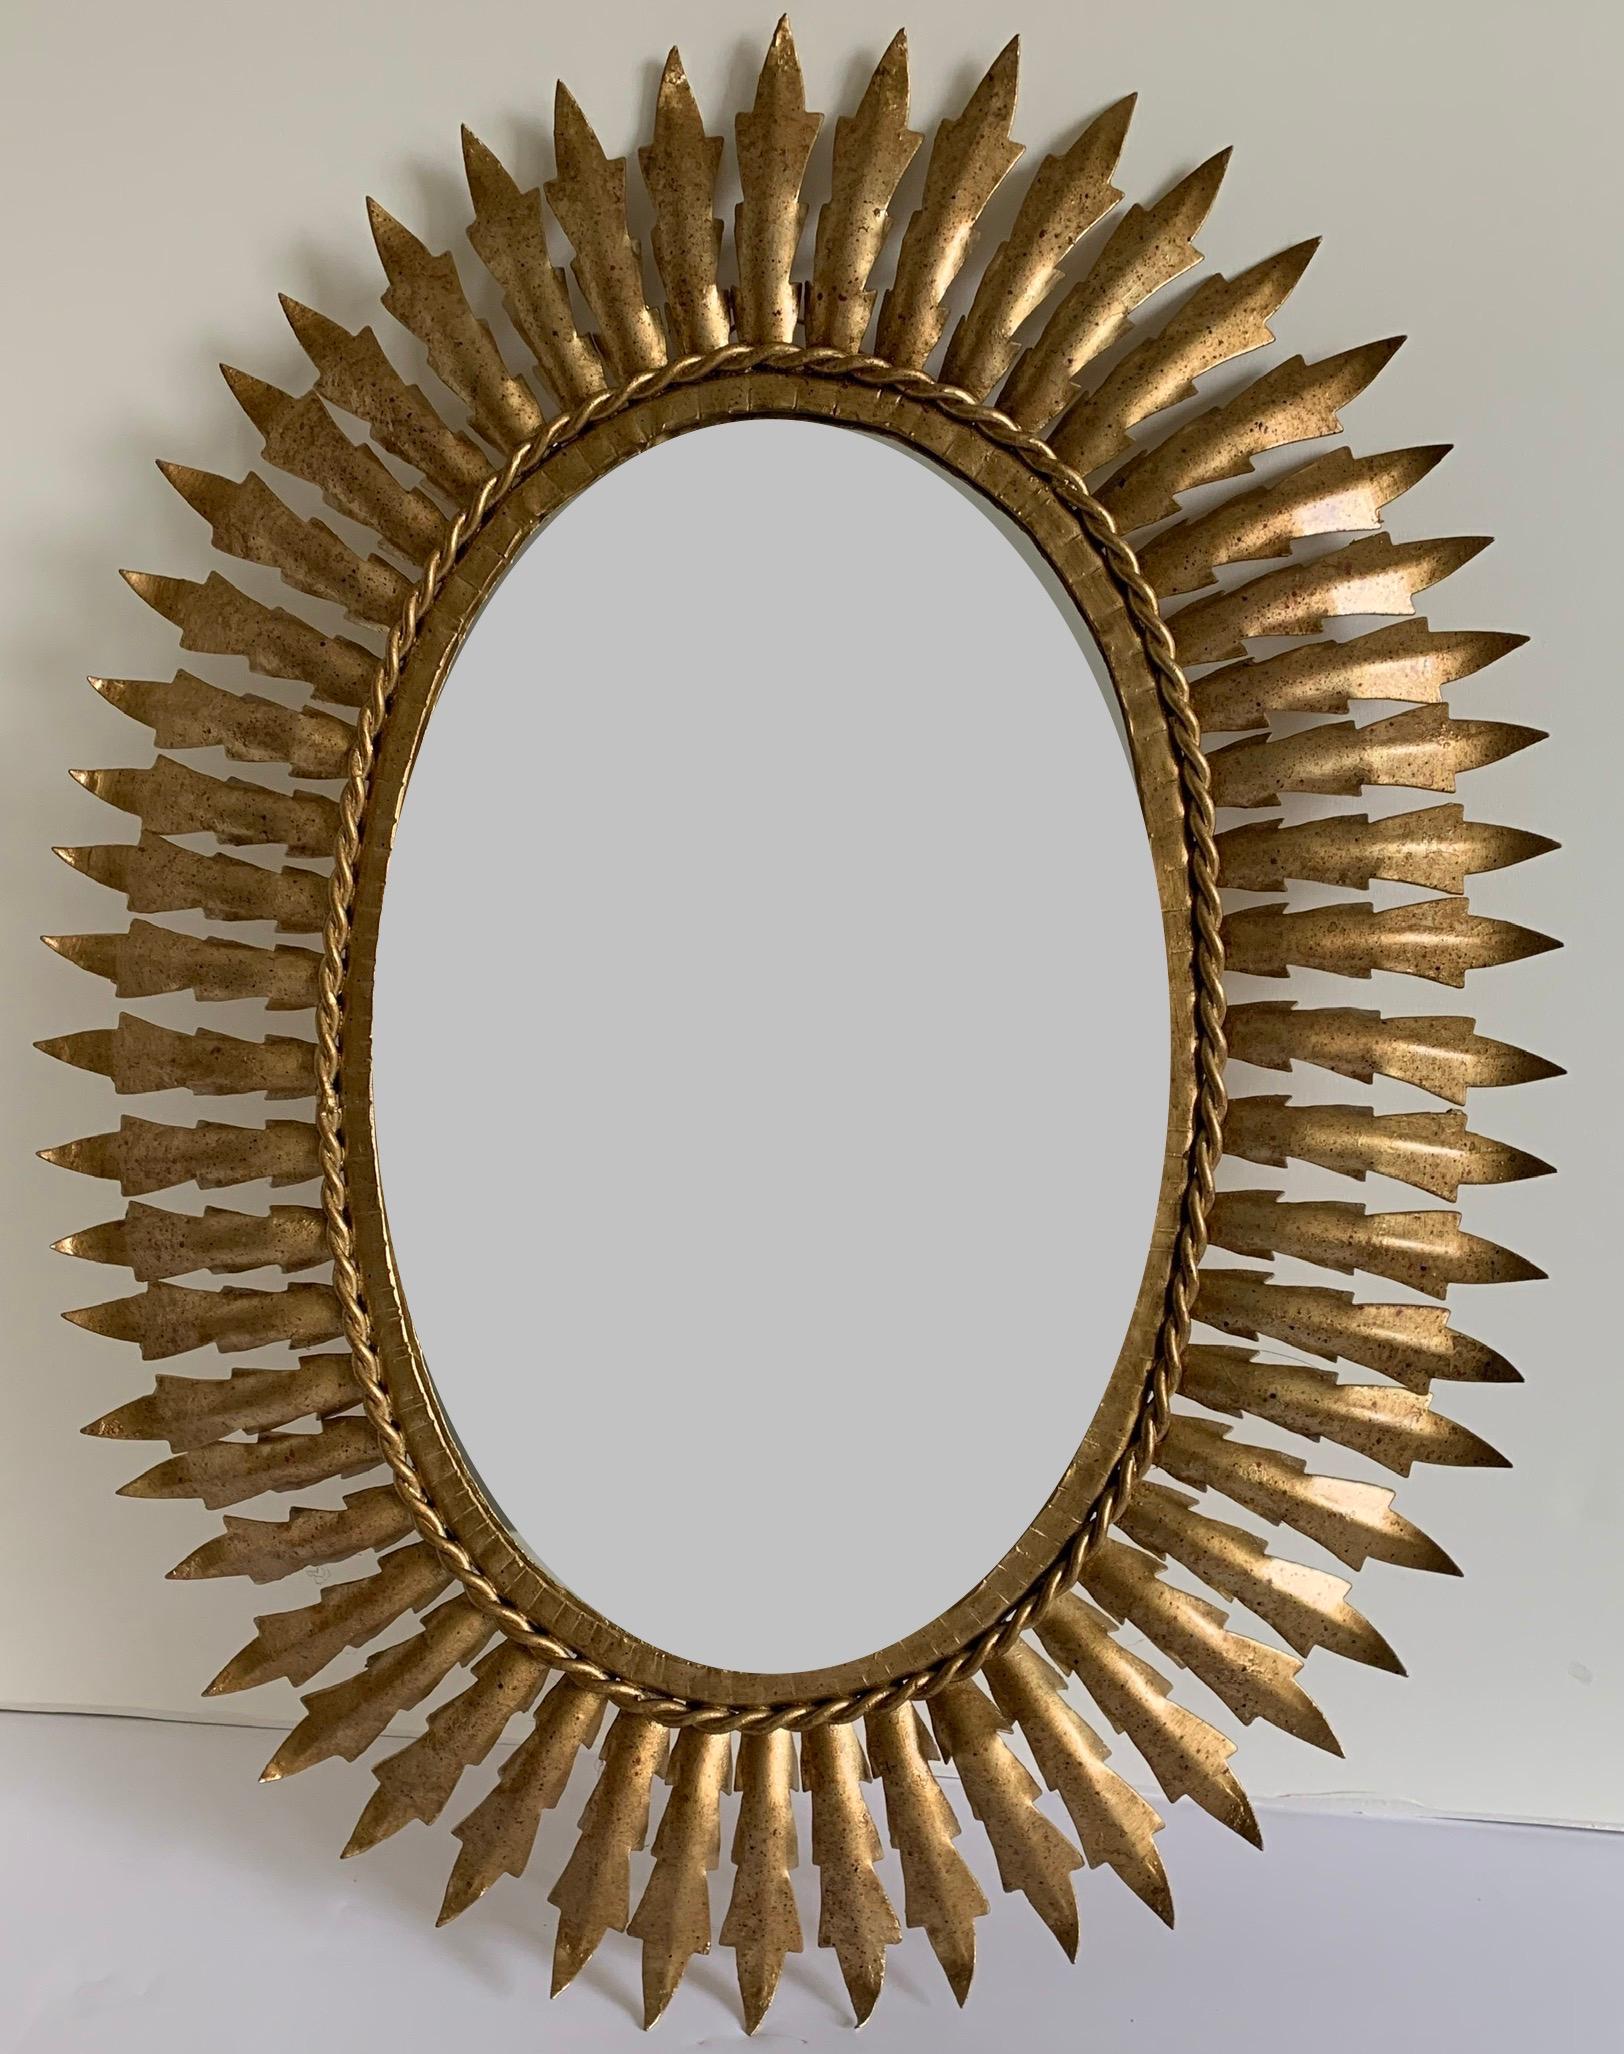 Midcentury Italian gilt metal sunburst mirror. Newly painted in an antique gold finish with original mirrored glass. Glass portion is 14” tall x 9” wide.
Back wire for hanging. Hanging hardware not included.